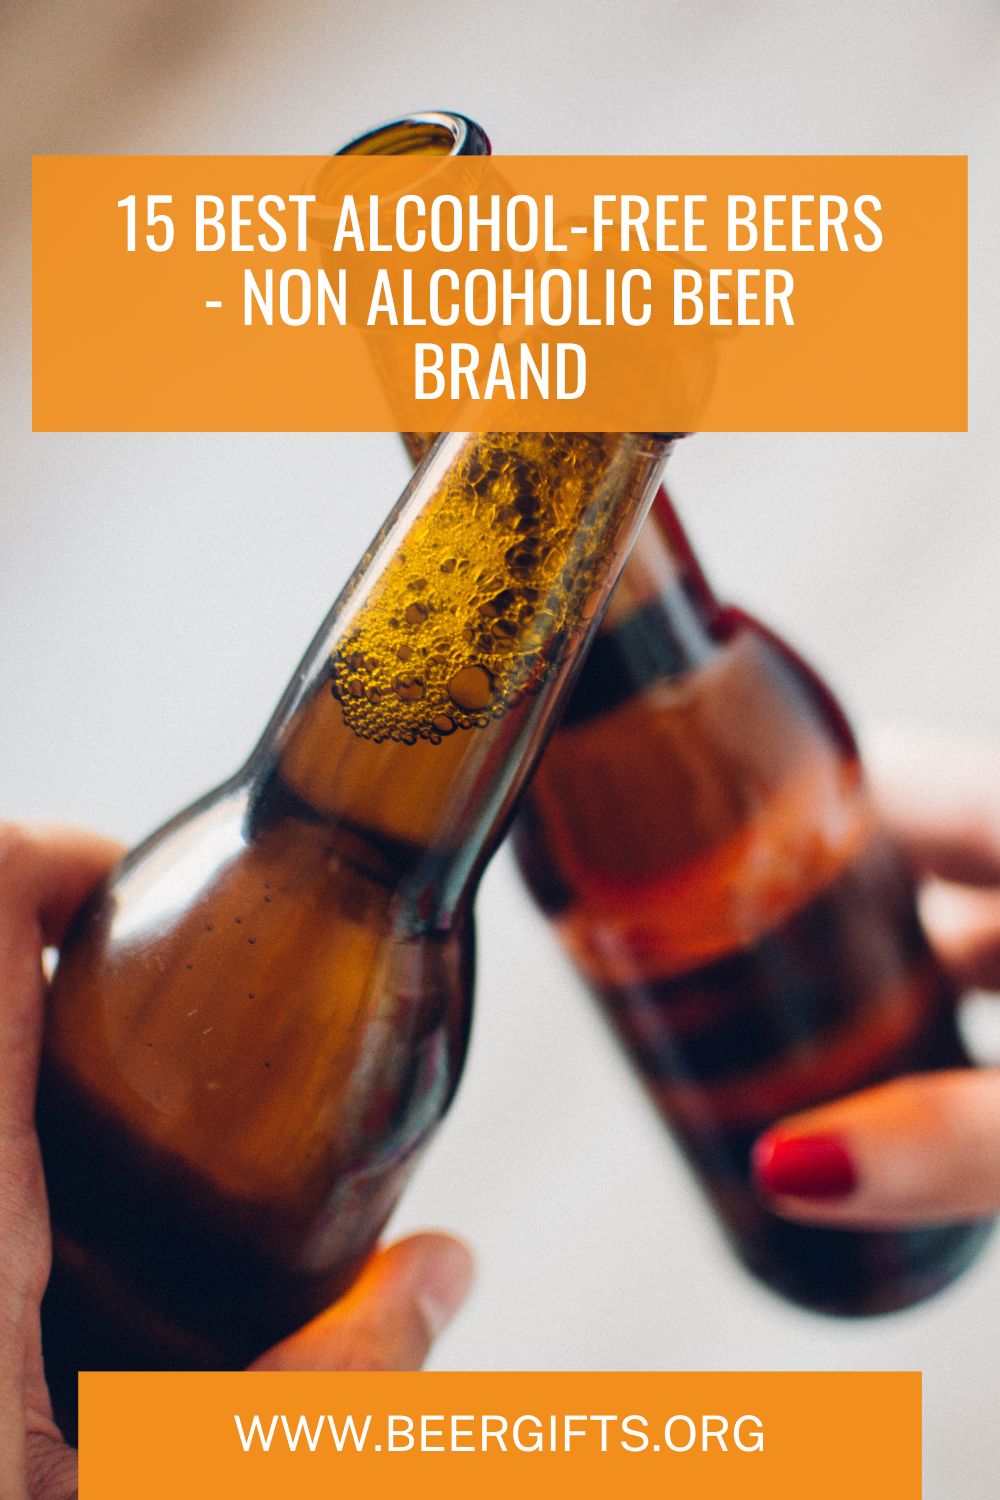 15 Best Alcohol-Free Beers - Non Alcoholic Beer Brand1